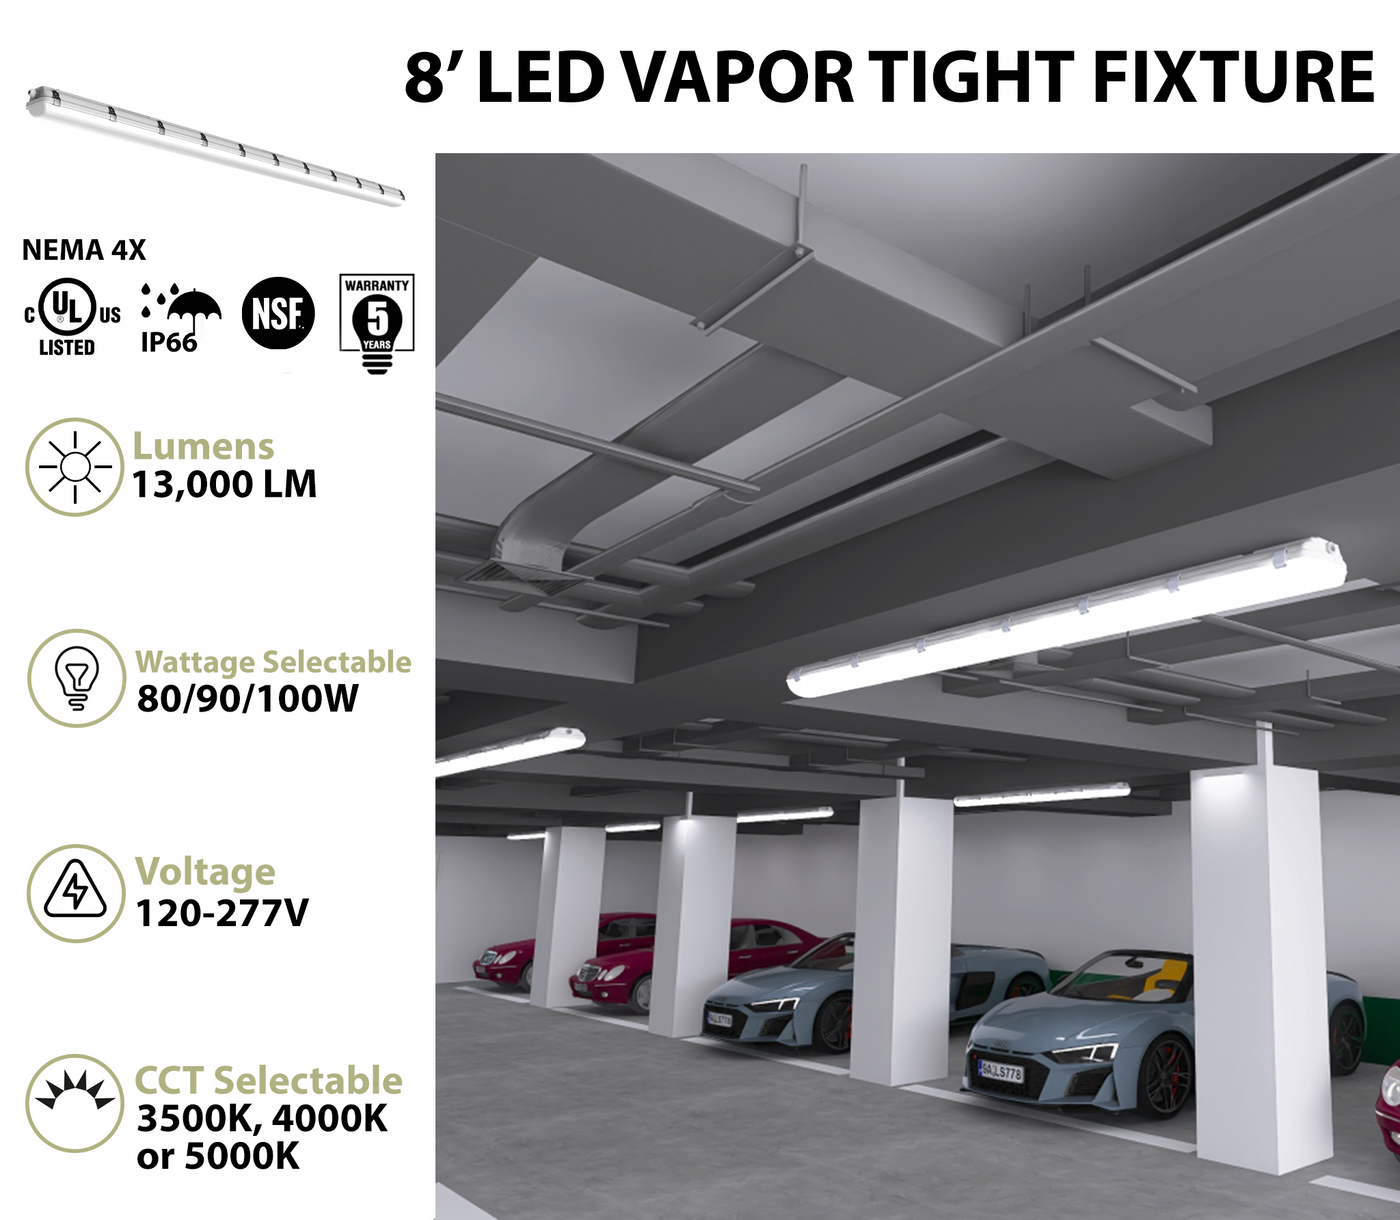 8FT LED Vapor Tight Fixture, 13000 Lumen Max, CCT and Wattage Selectable, 120-277V